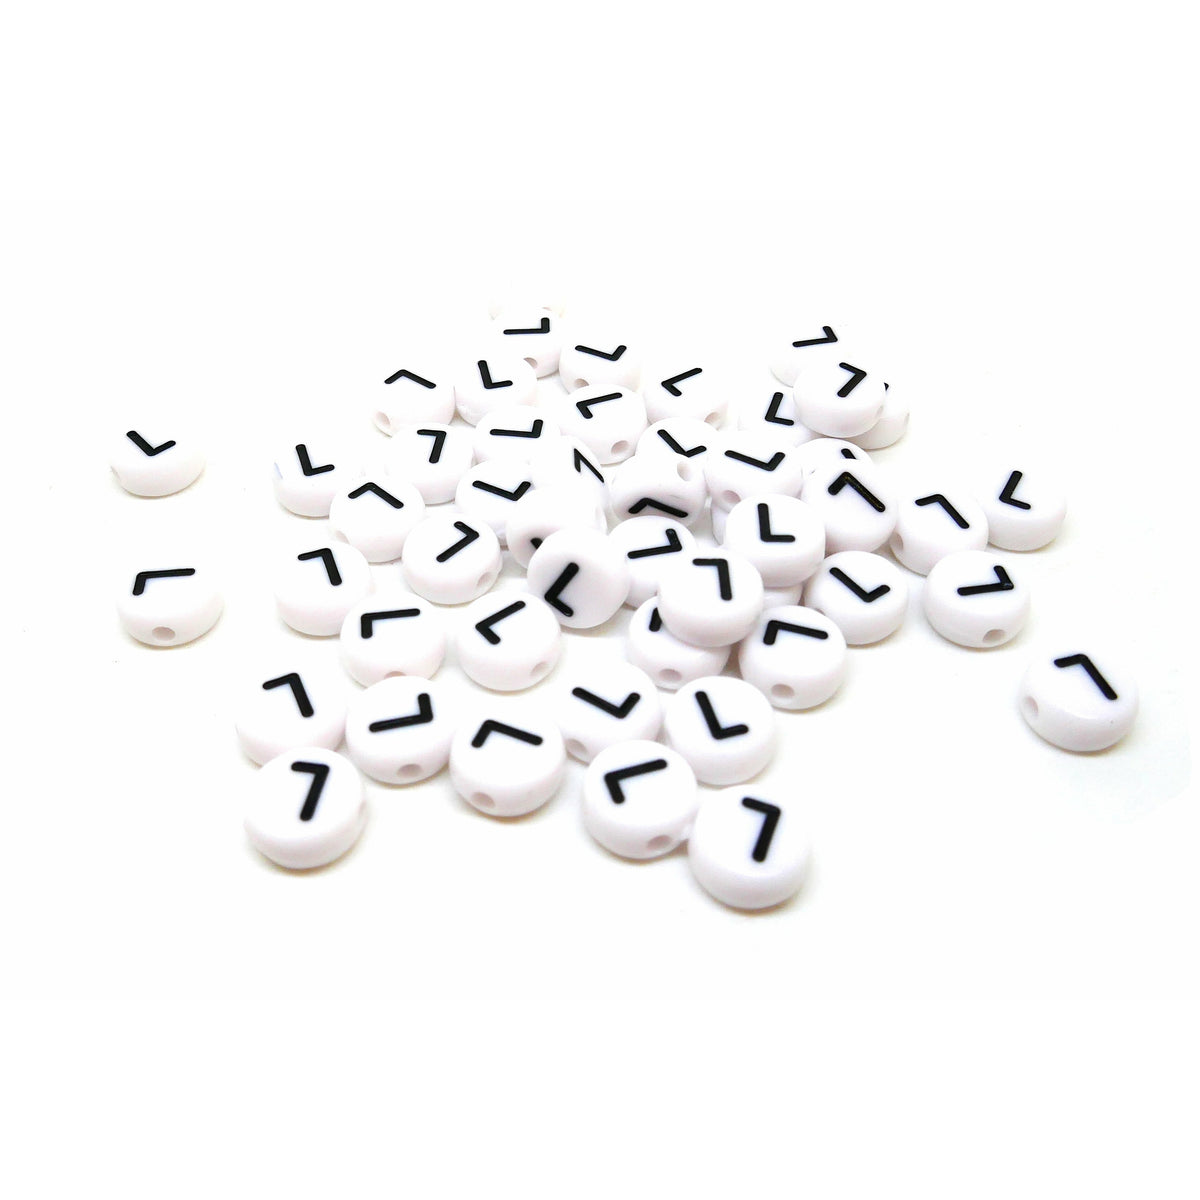 Letter Beads Alphabet Beads Glow in the Dark Letter Beads Glow Alphabet  Beads Wholesale Beads Bulk Beads 50 pieces 7mm